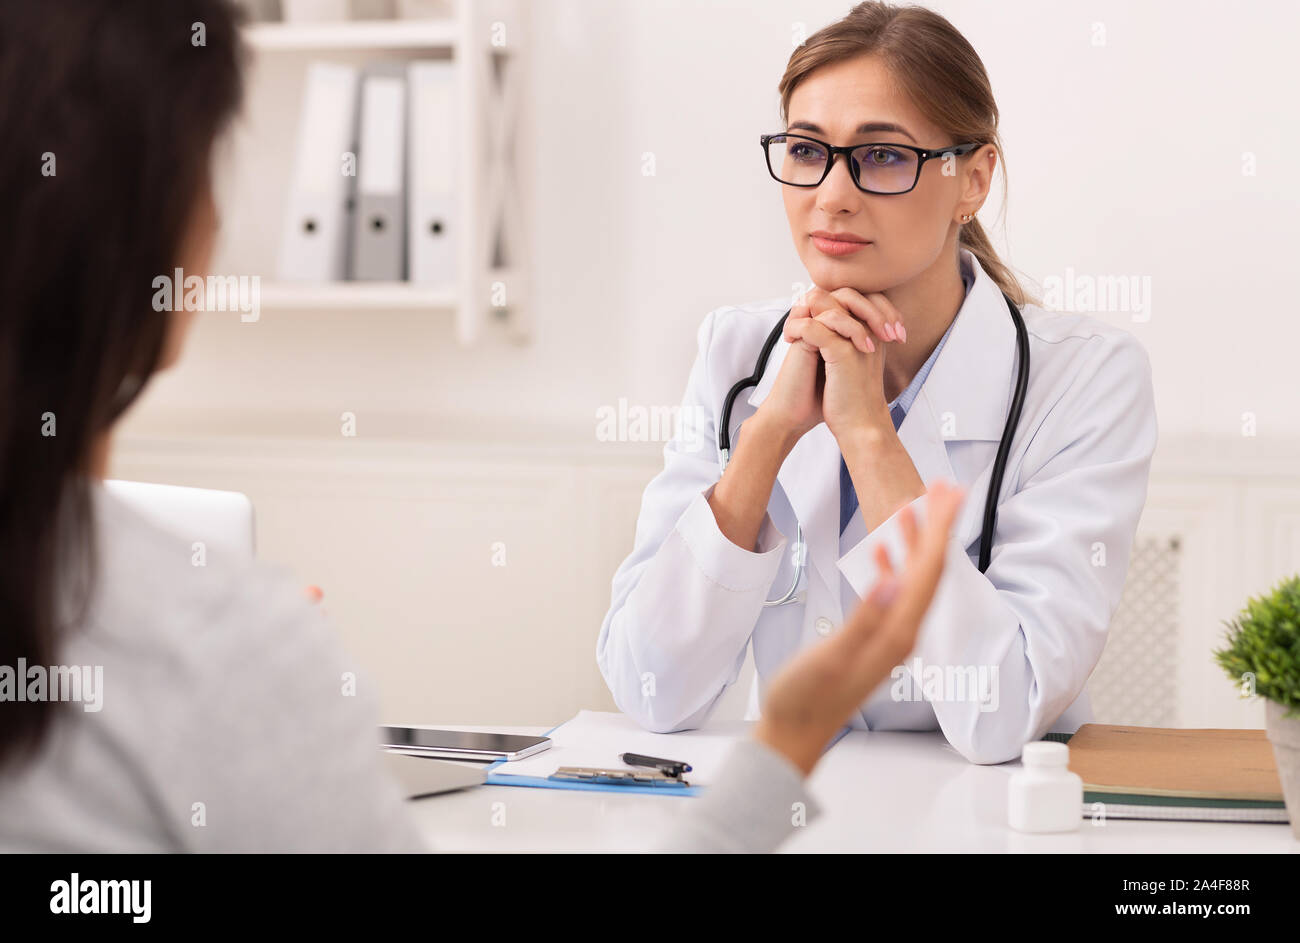 Doctor Woman Listening To Patient During Medical Appointment In Office Stock Photo